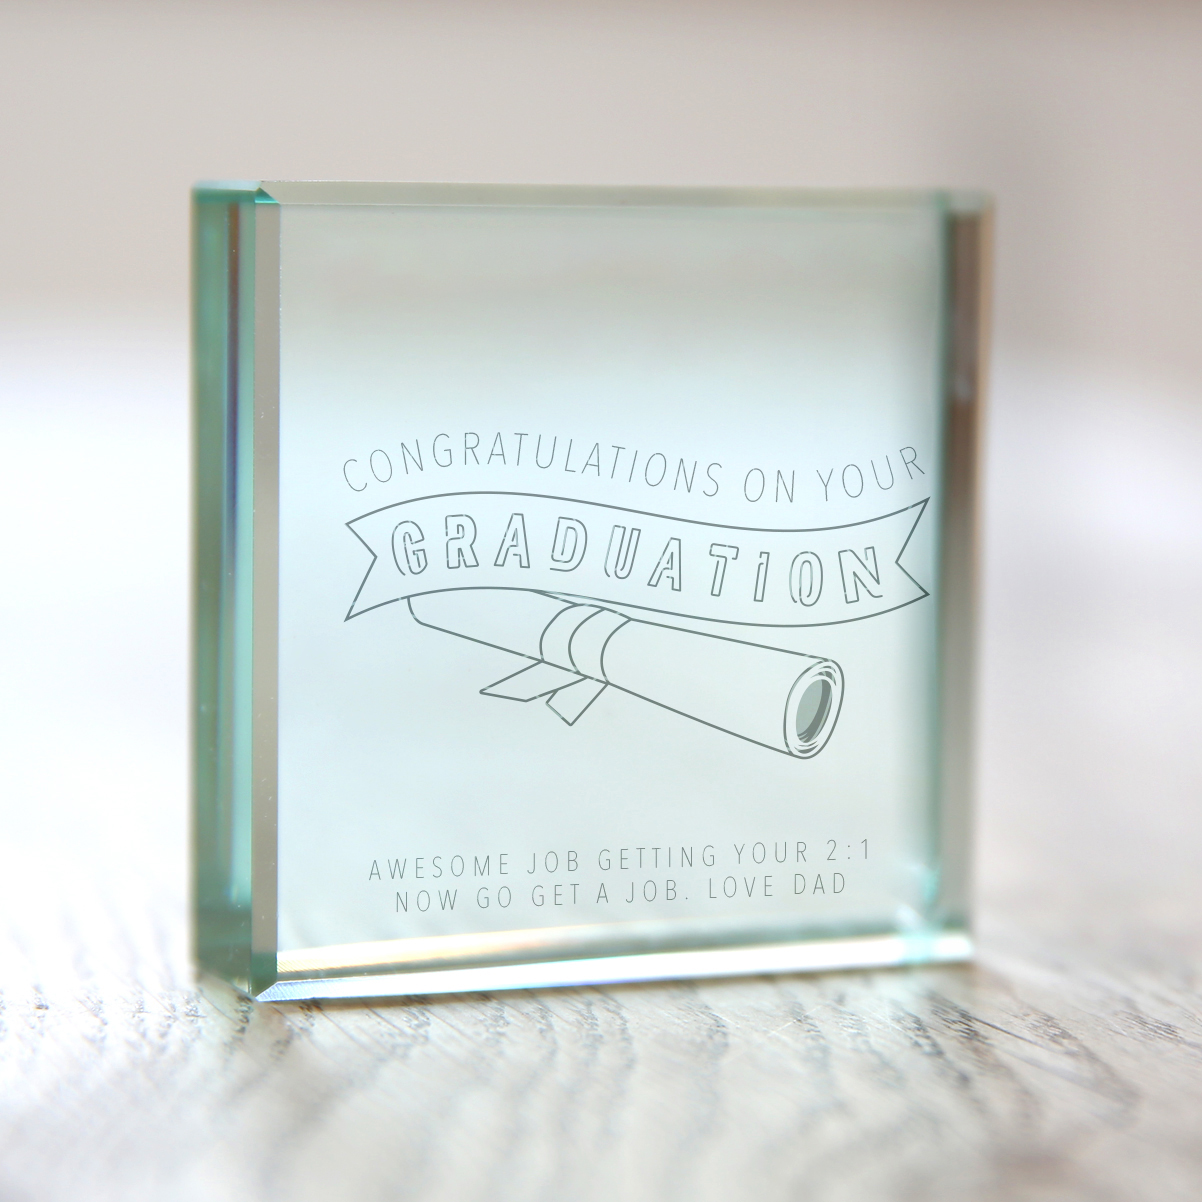 Personalised Glass Token - Congratulations On Your Graduation